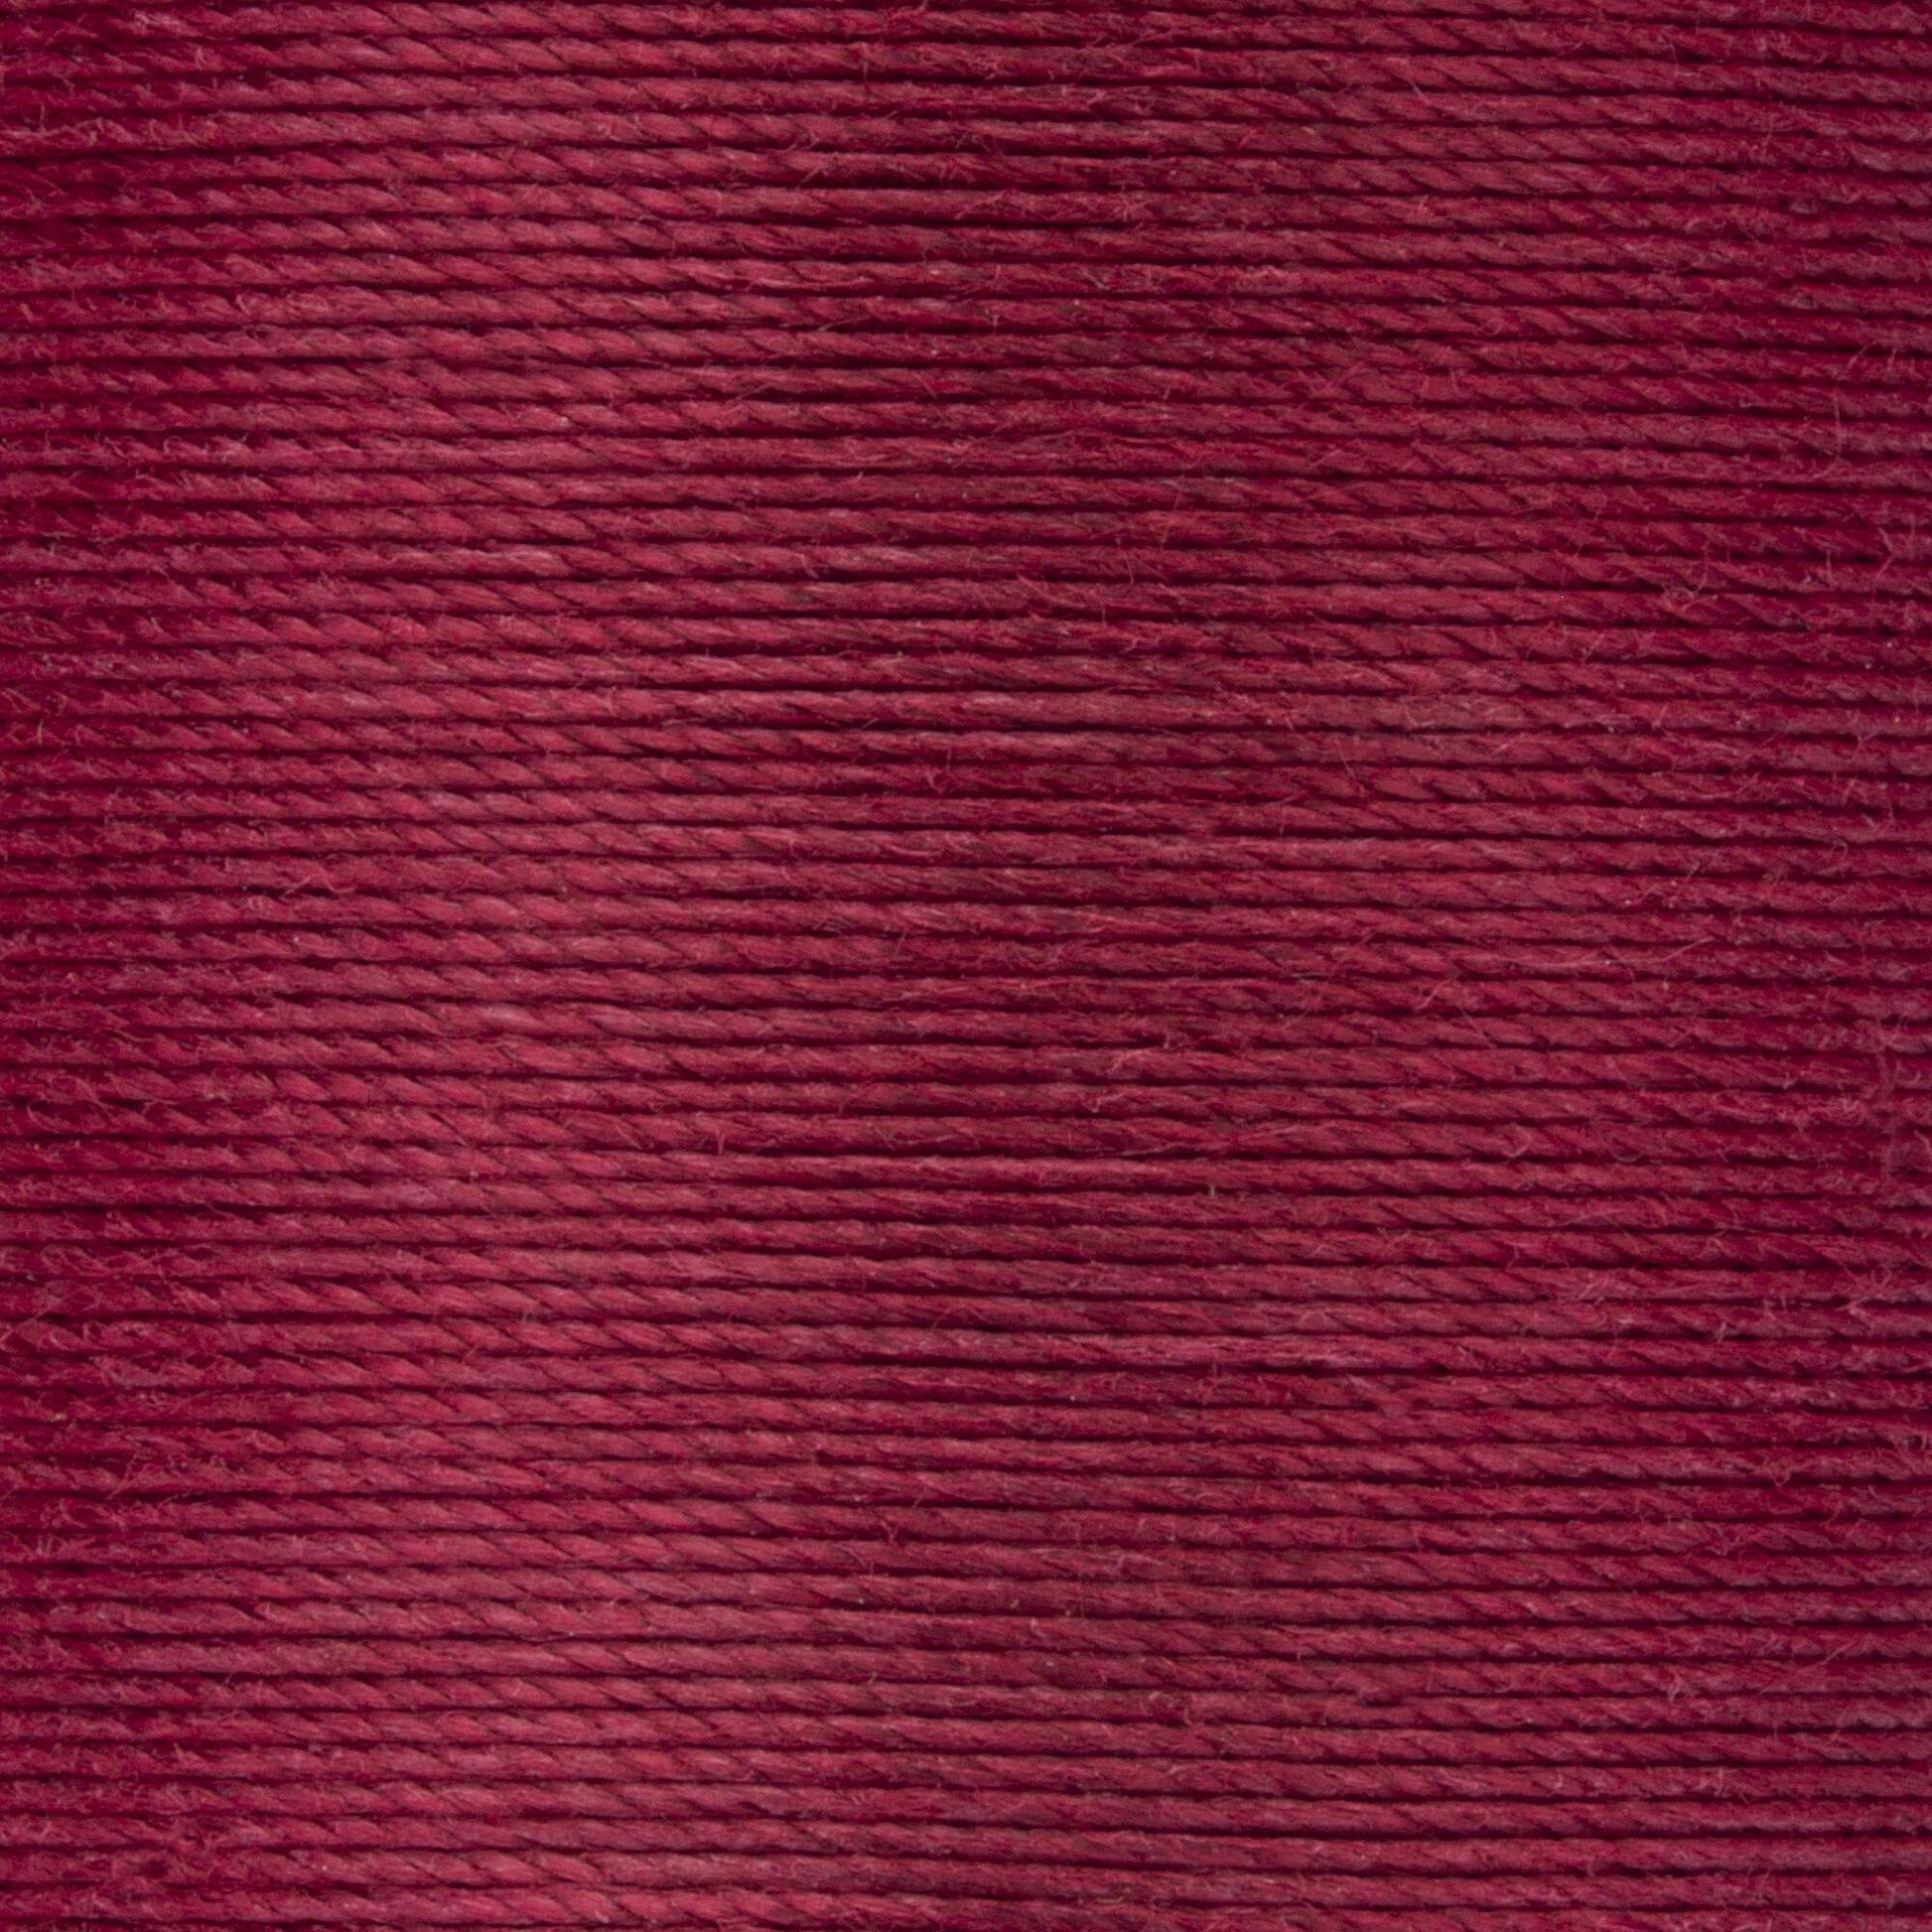 Coats & Clark Bold Hand Quilting Thread (175 Yards) Barberry Red